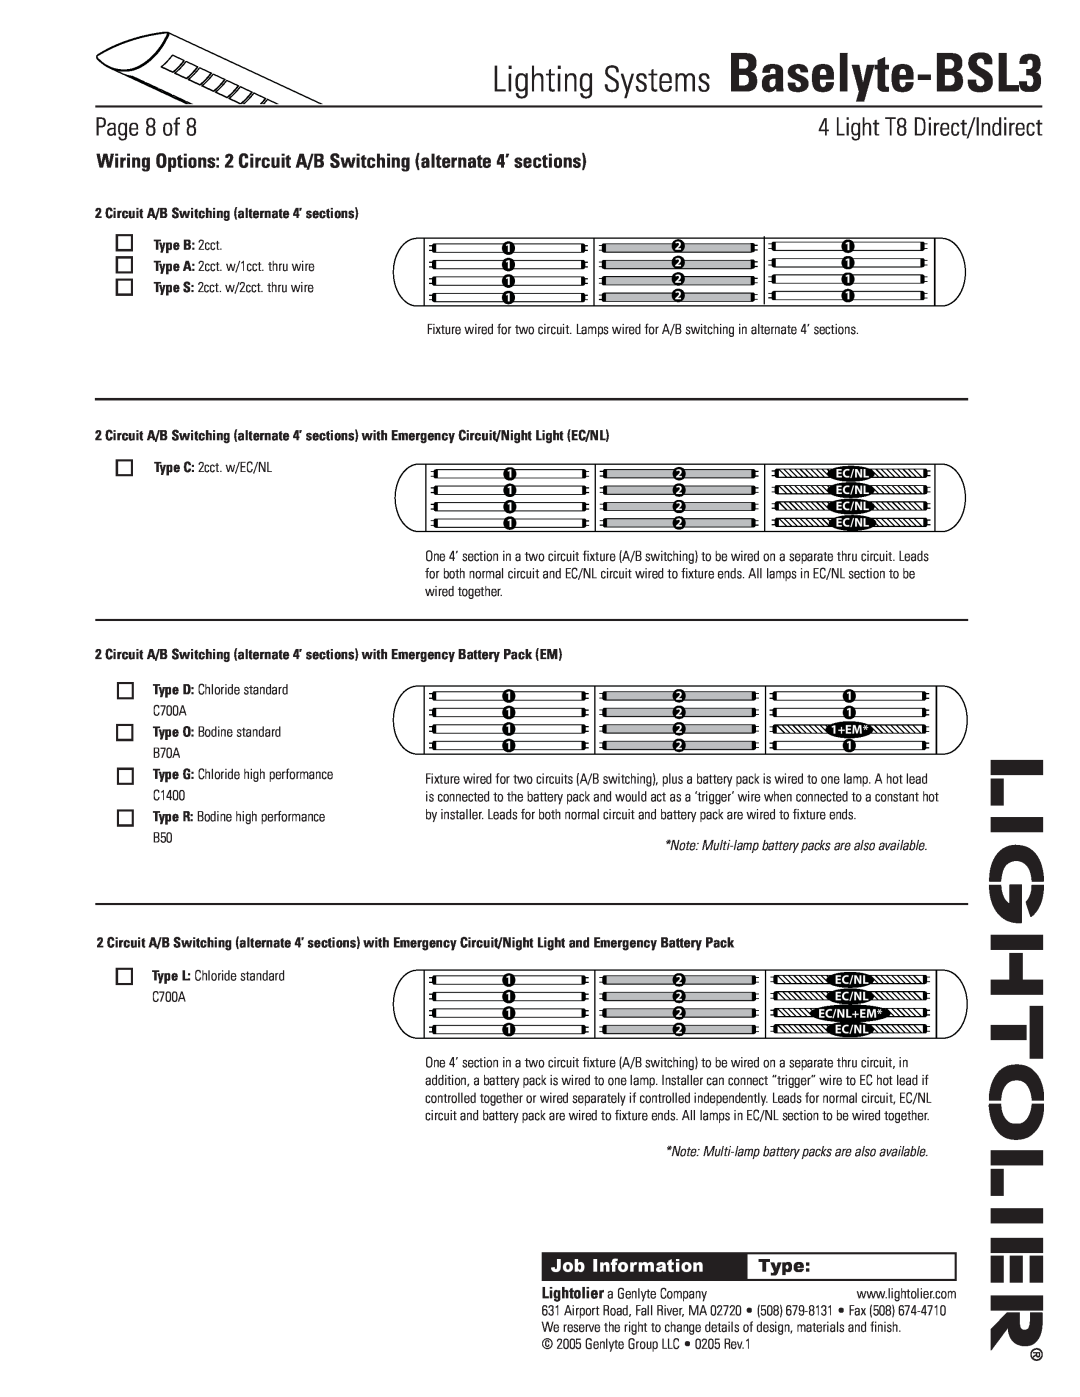 Lightolier Baselyte-BSL3 Circuit A/B Switching alternate 4’ sections, Type B 2cct, Type O Bodine standard B70A, Page of 